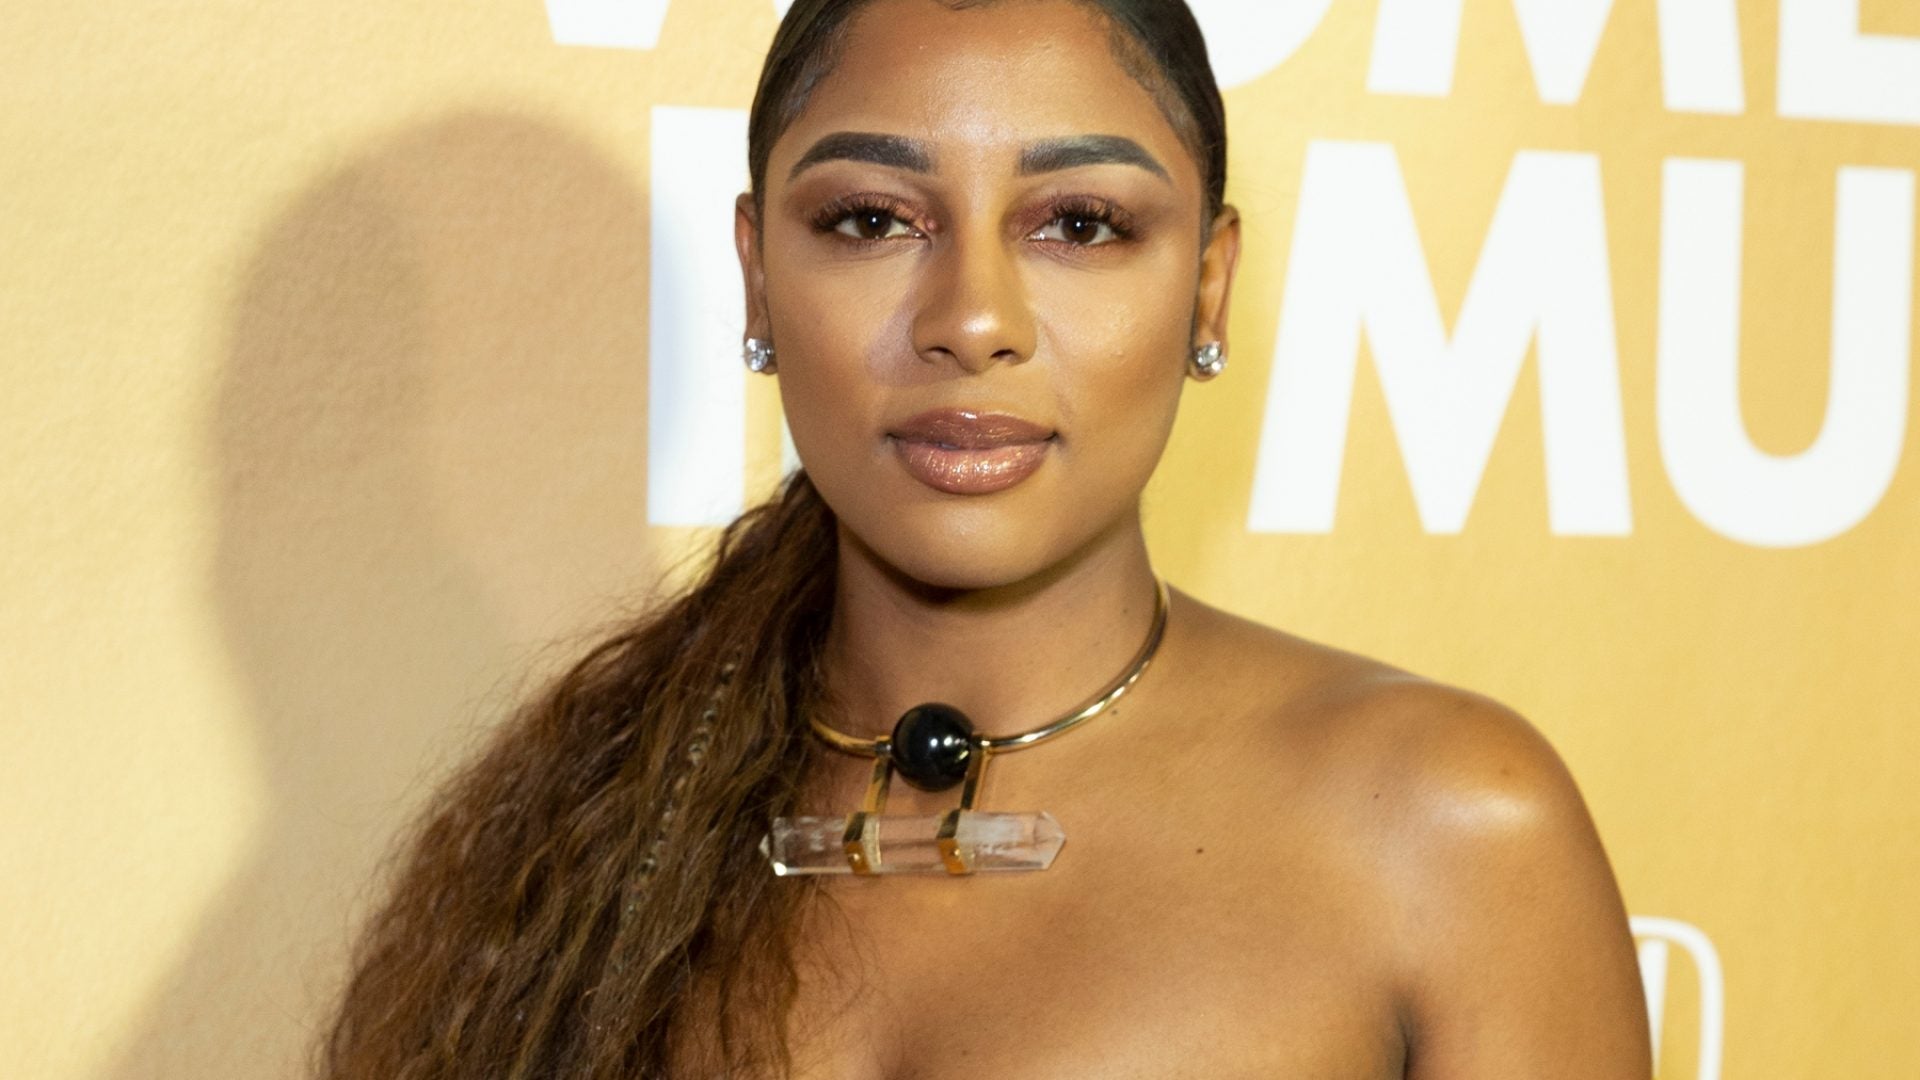 Singer Victoria Monét On Her Devastating Postpartum Hair Loss: 'Probably Lost About 40% Of My Hair'